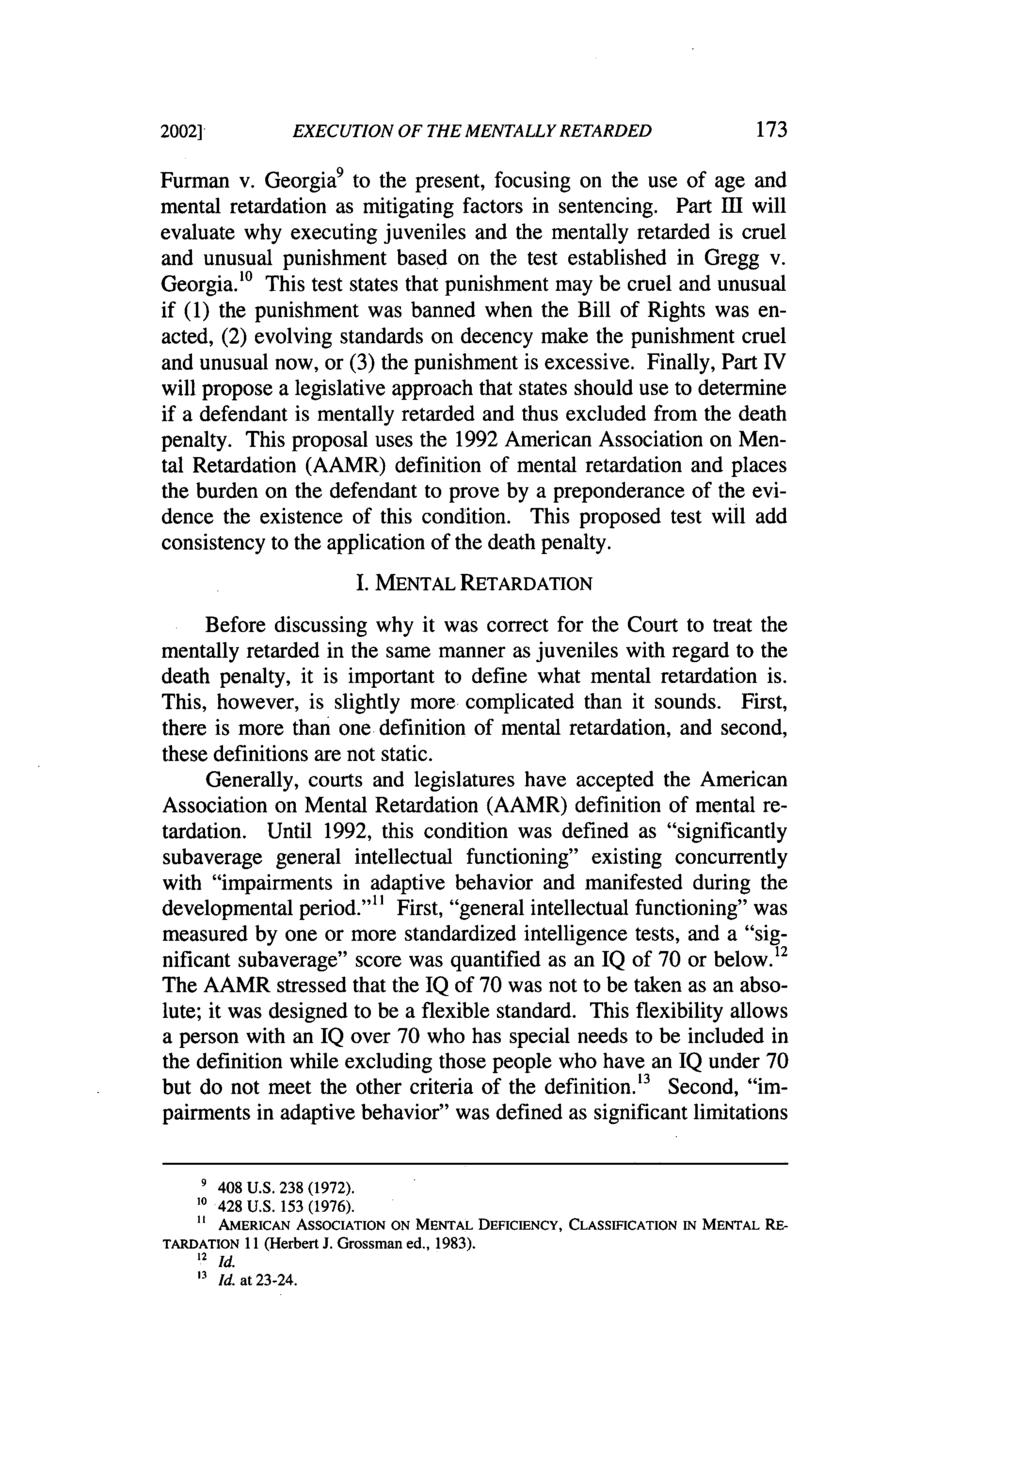 2002] EXECUTION OF THE MENTALLY RETARDED Furman v. Georgia to the present, focusing on the use of age and mental retardation as mitigating factors in sentencing.